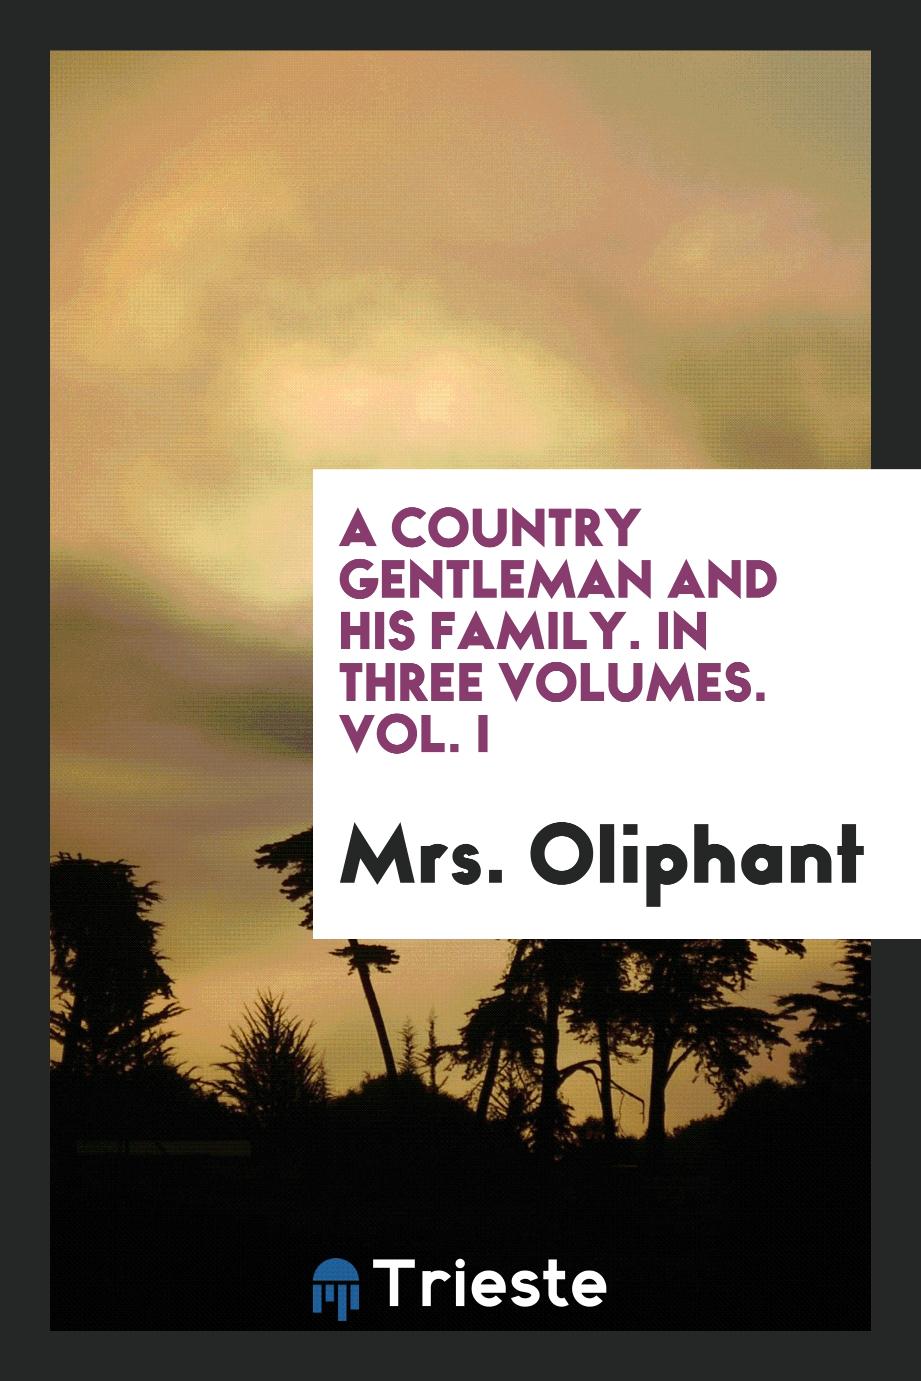 A country gentleman and his family. In three volumes. Vol. I